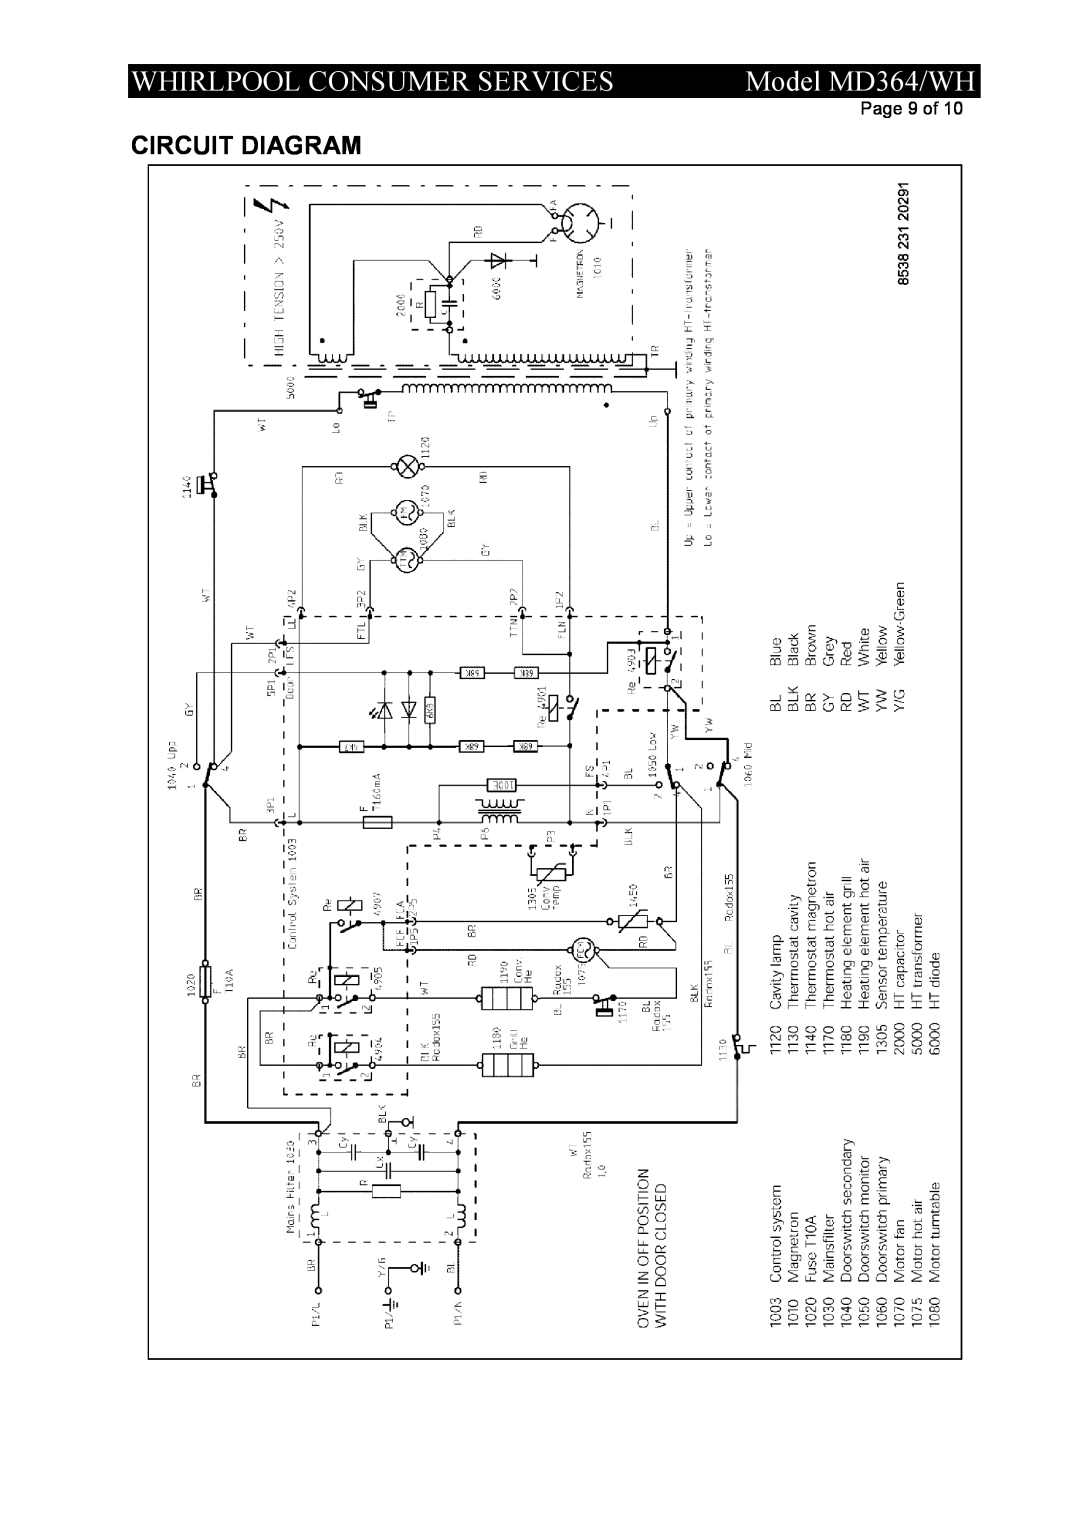 Whirlpool service manual Circuit Diagram, Whirlpool Consumer Services, Model MD364/WH, Page 9 of 